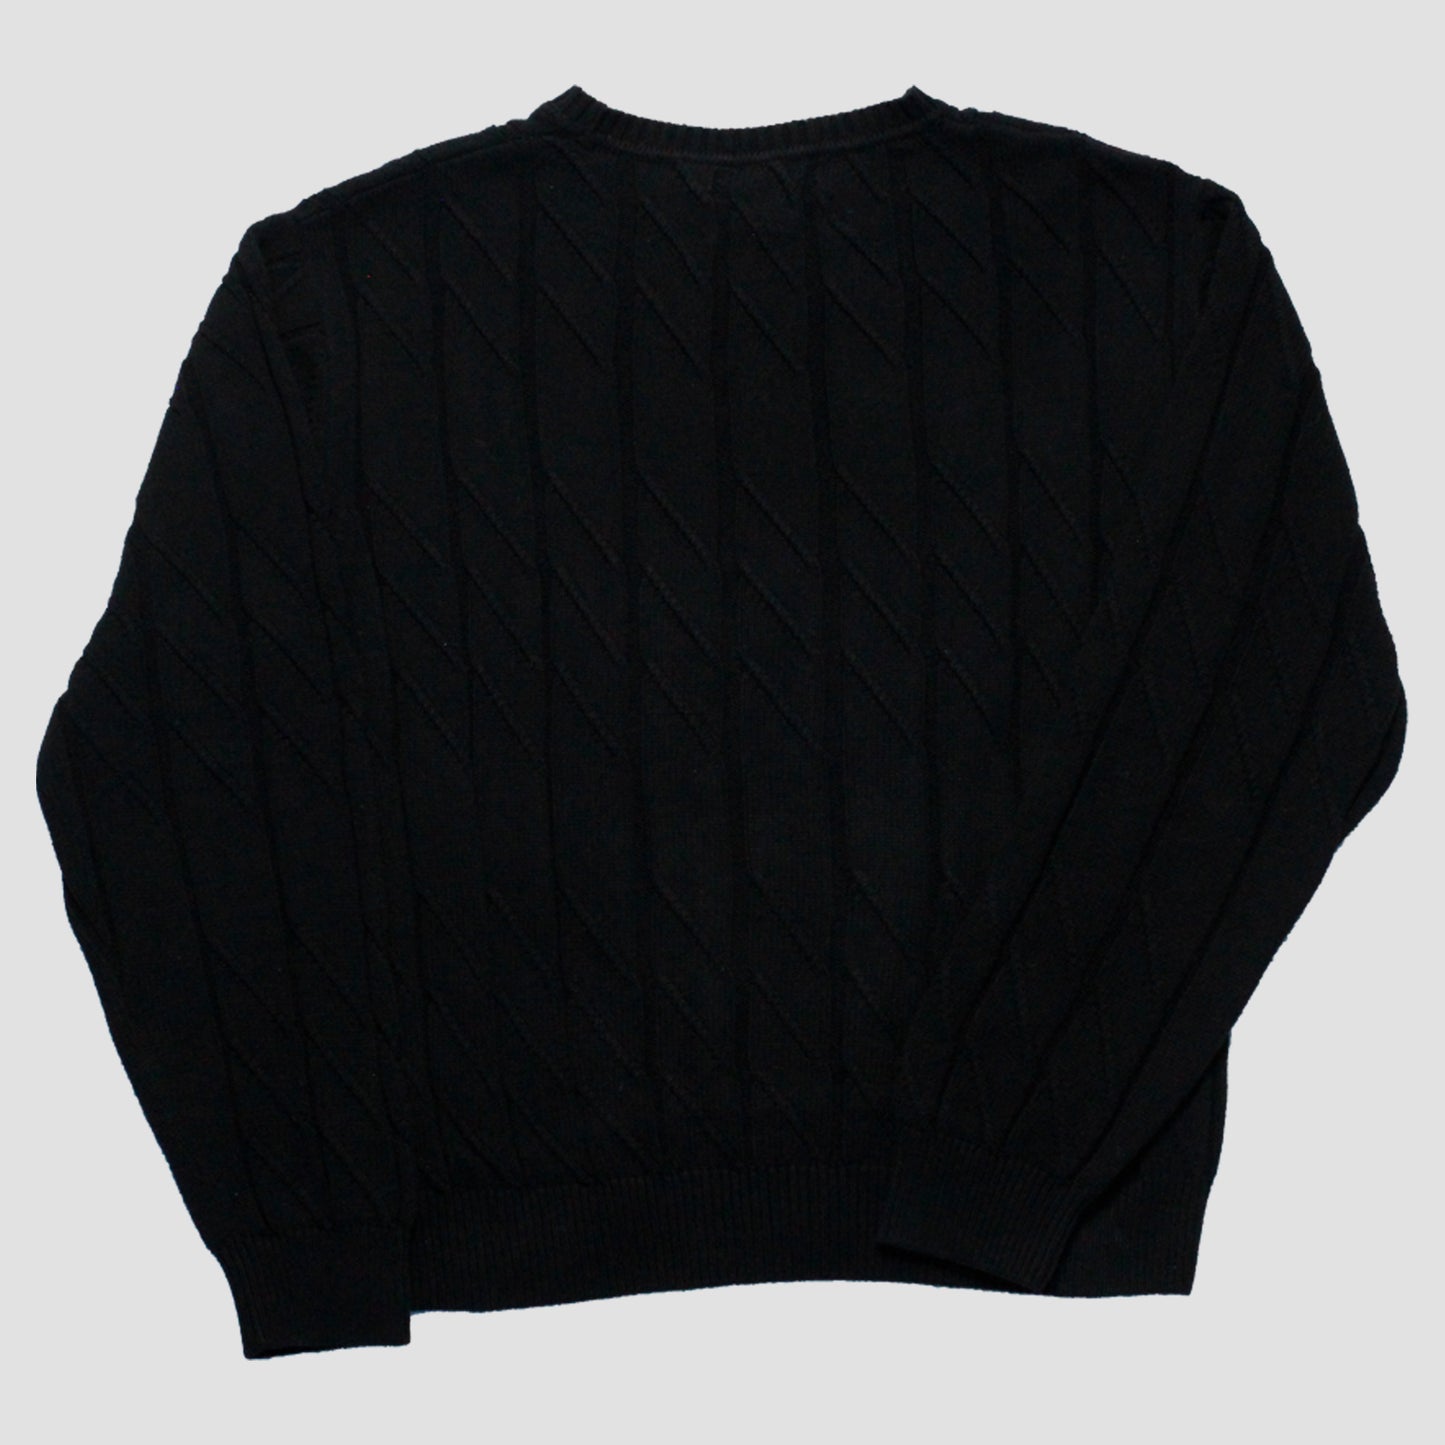 "HOLLYWOOD'S MOST HAUNTED" Heavyweight Knit Sweater (M)